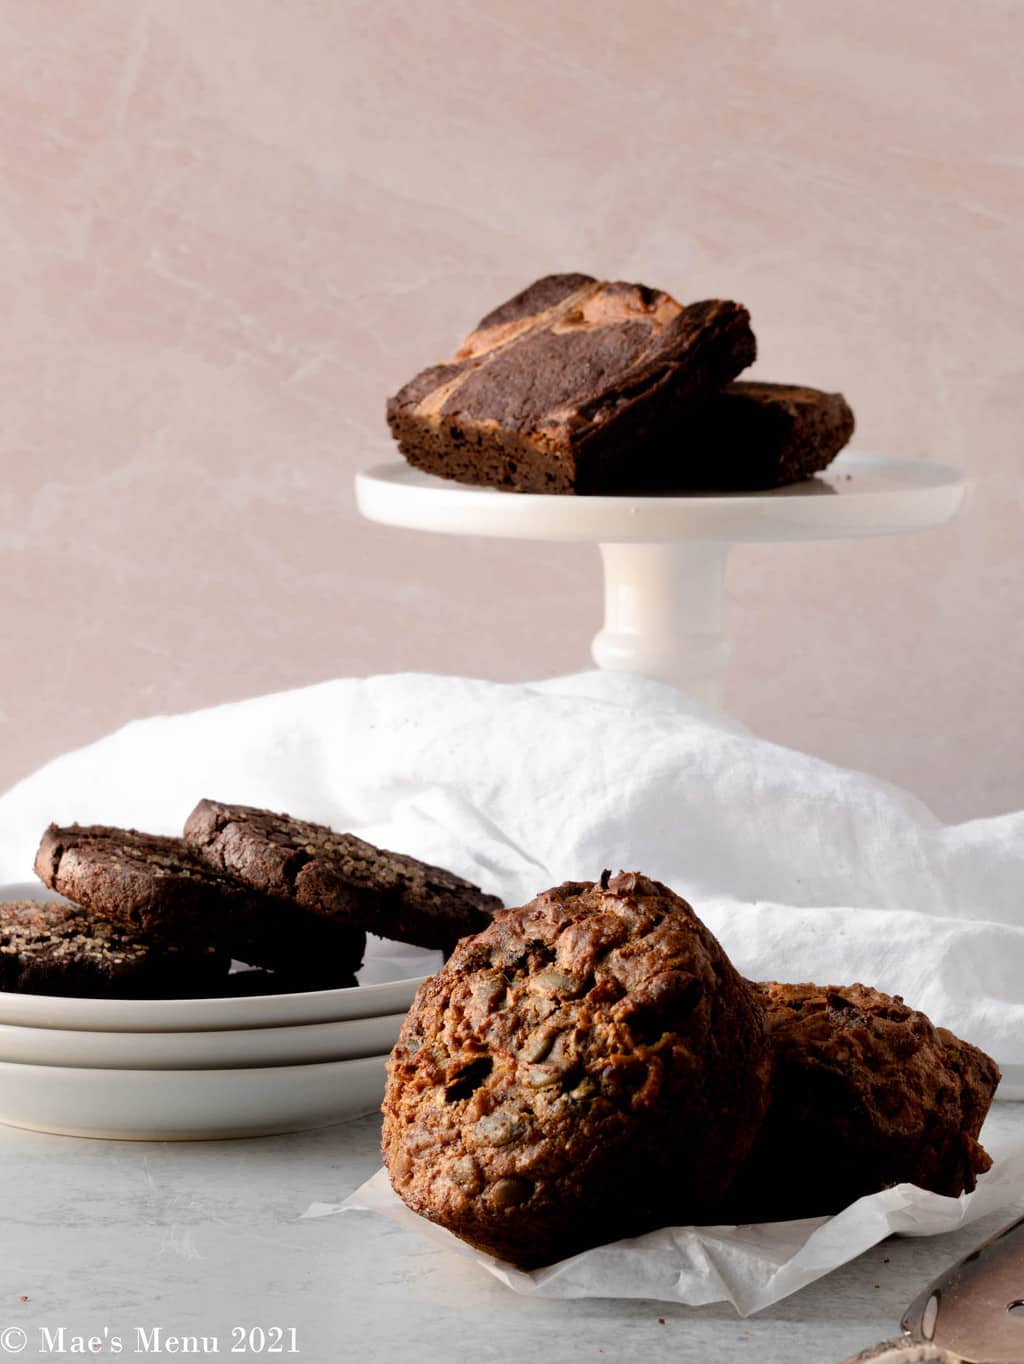 A cake stand of brownies, a dish of chocolate sables, and two muffins in front.